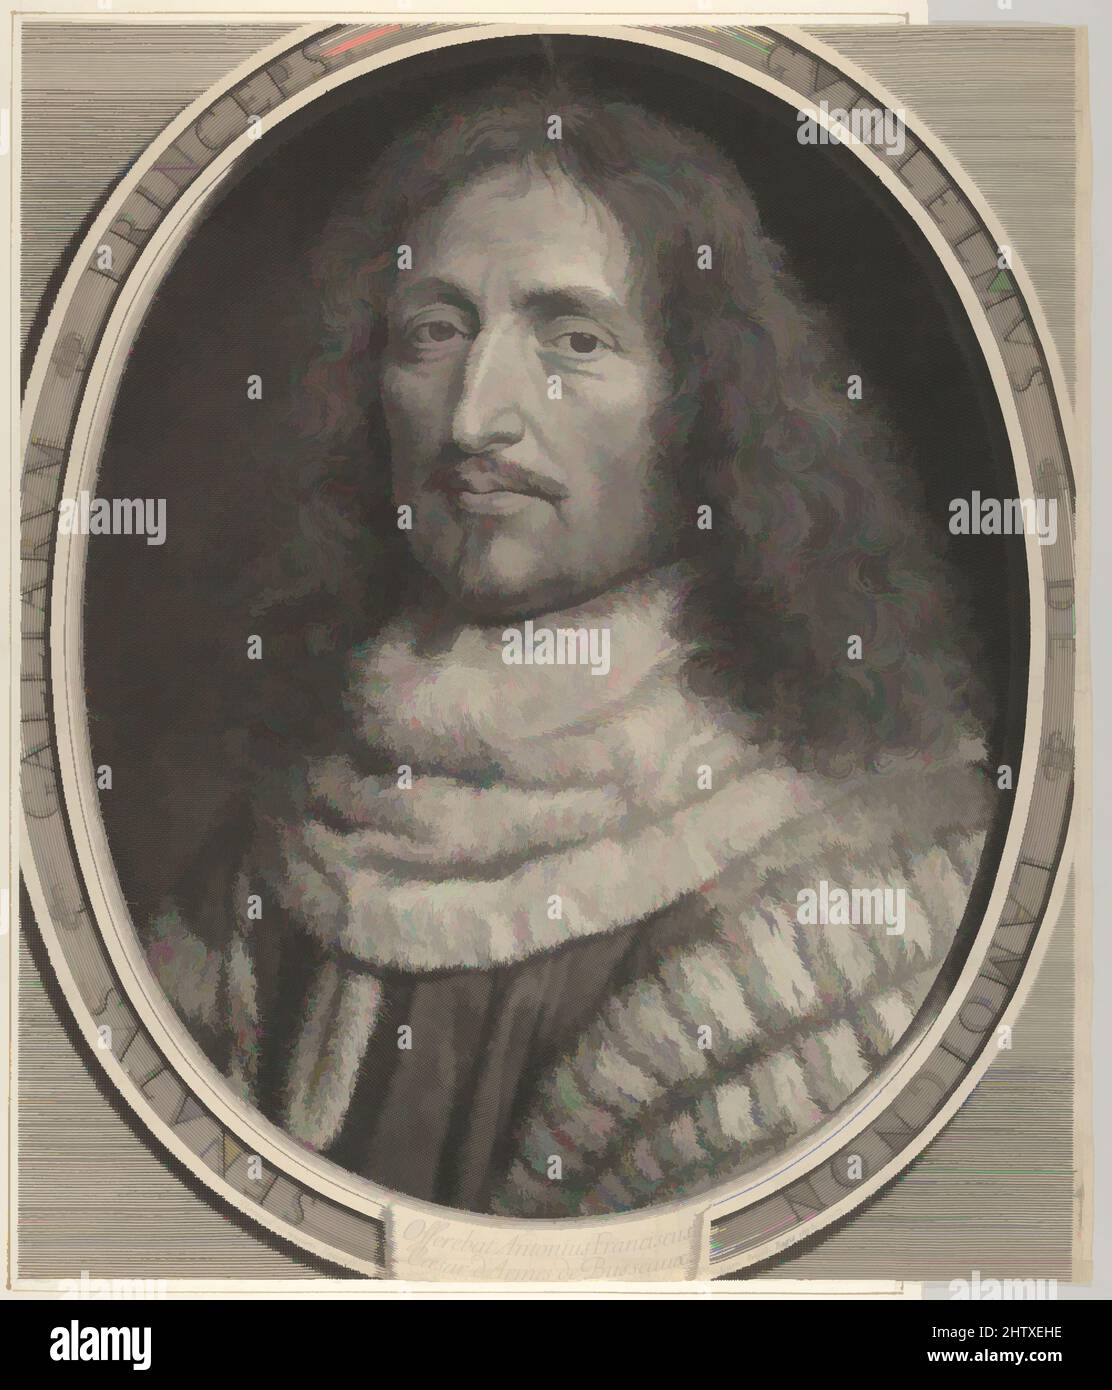 Art inspired by Guillaume de Lamoignon, 1676, Engraving; fourth state of four (Petitjean & Wickert), Sheet: 19 3/4 × 16 7/8 in. (50.2 × 42.9 cm), Prints, Robert Nanteuil (French, Reims 1623–1678 Paris, Classic works modernized by Artotop with a splash of modernity. Shapes, color and value, eye-catching visual impact on art. Emotions through freedom of artworks in a contemporary way. A timeless message pursuing a wildly creative new direction. Artists turning to the digital medium and creating the Artotop NFT Stock Photo